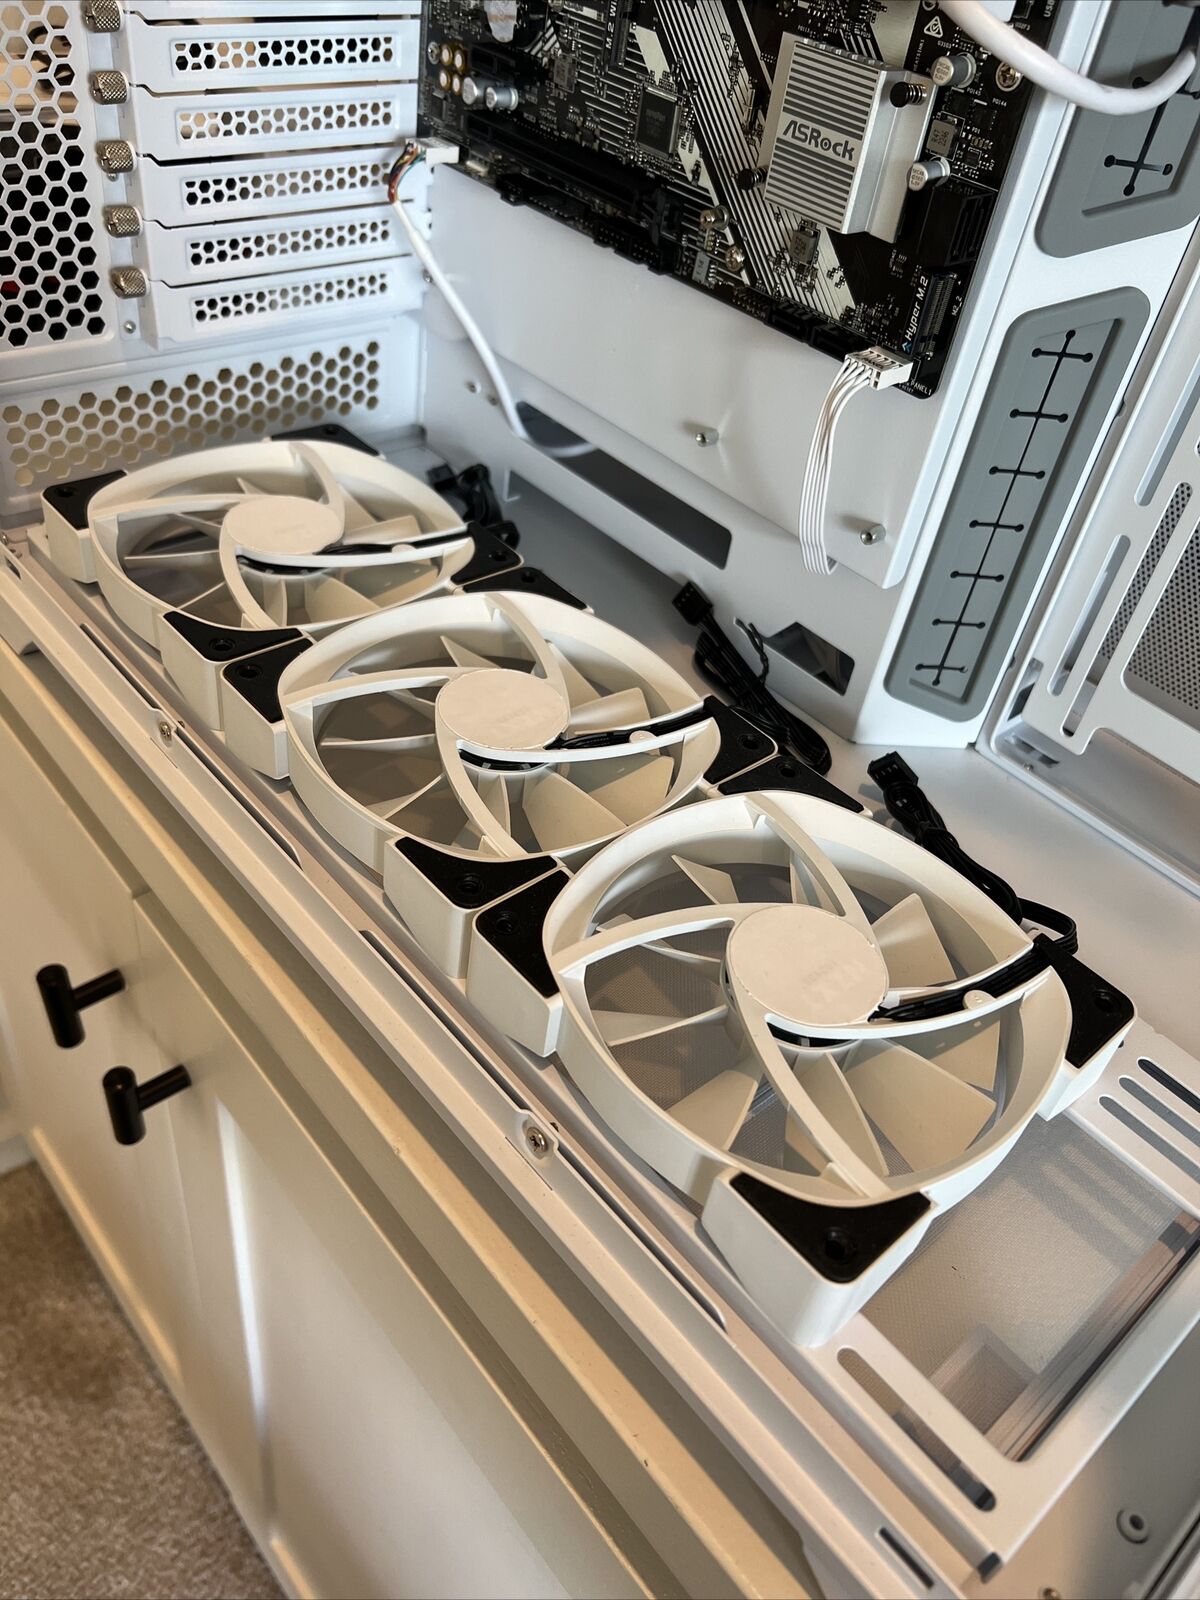 NZXT Aer RGB 2 120mm Case Fan - White (3-Pack) (No Controller)